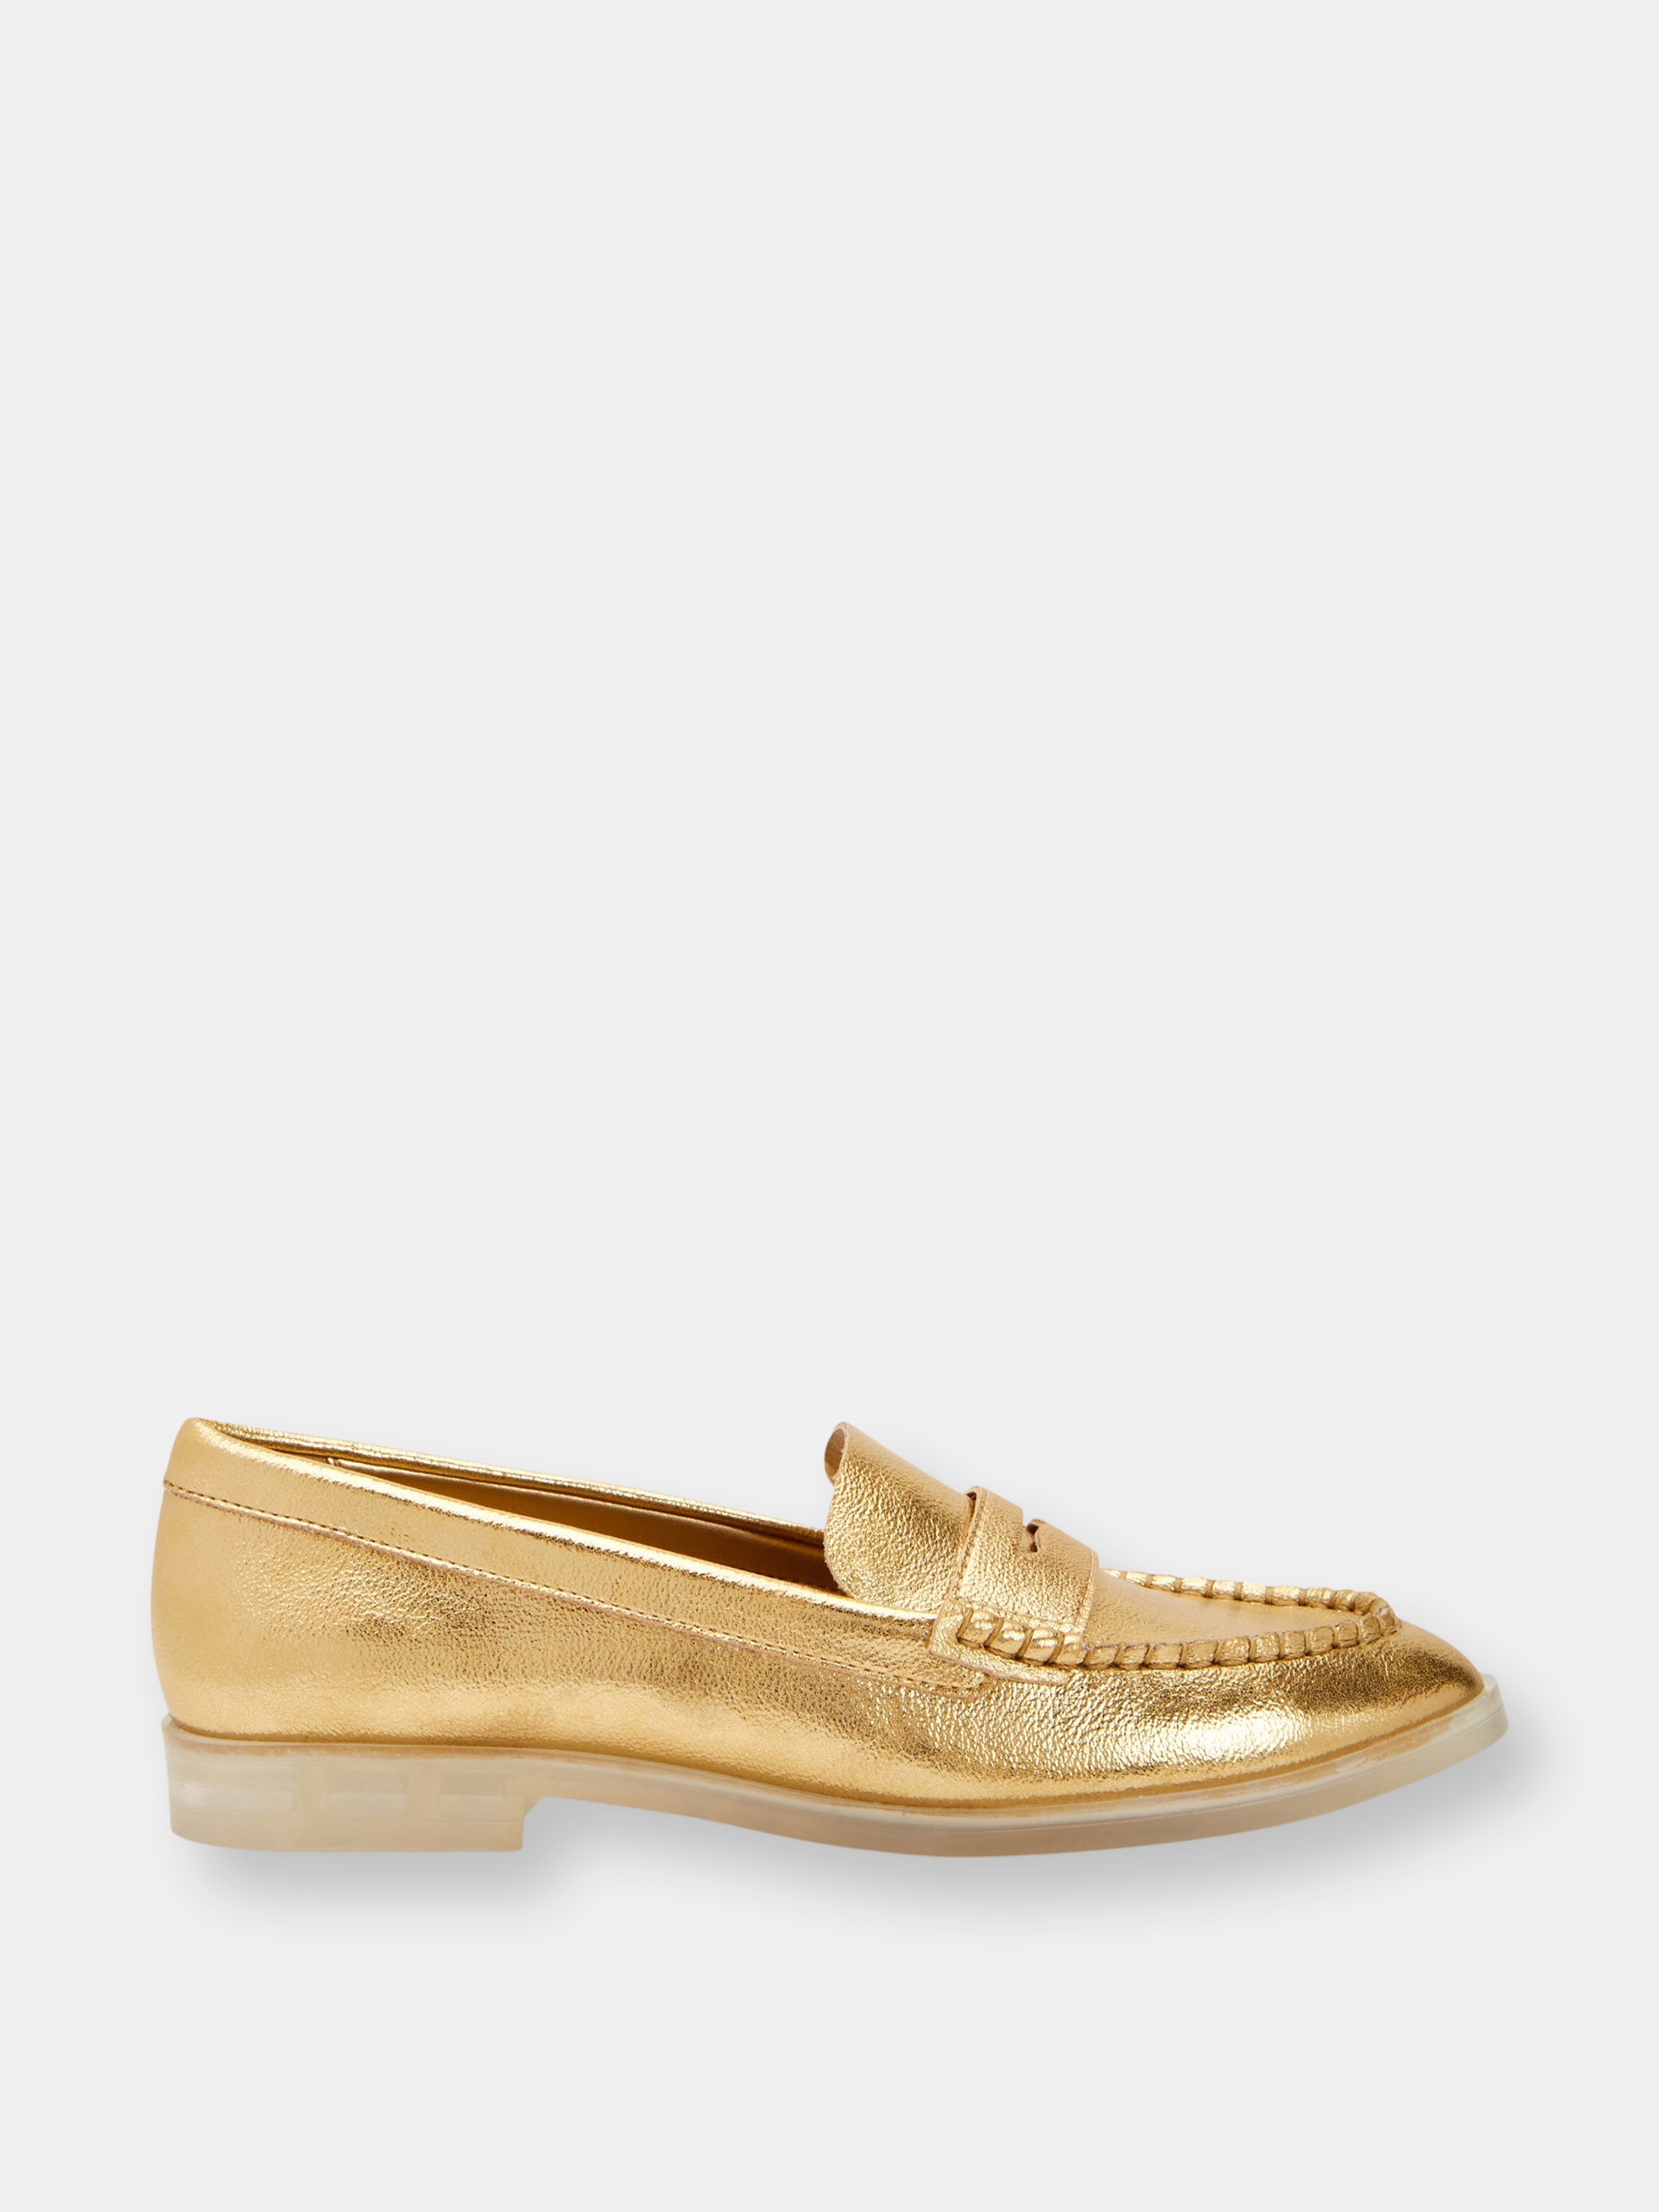 KATY PERRY KATY PERRY THE GELI LOAFER